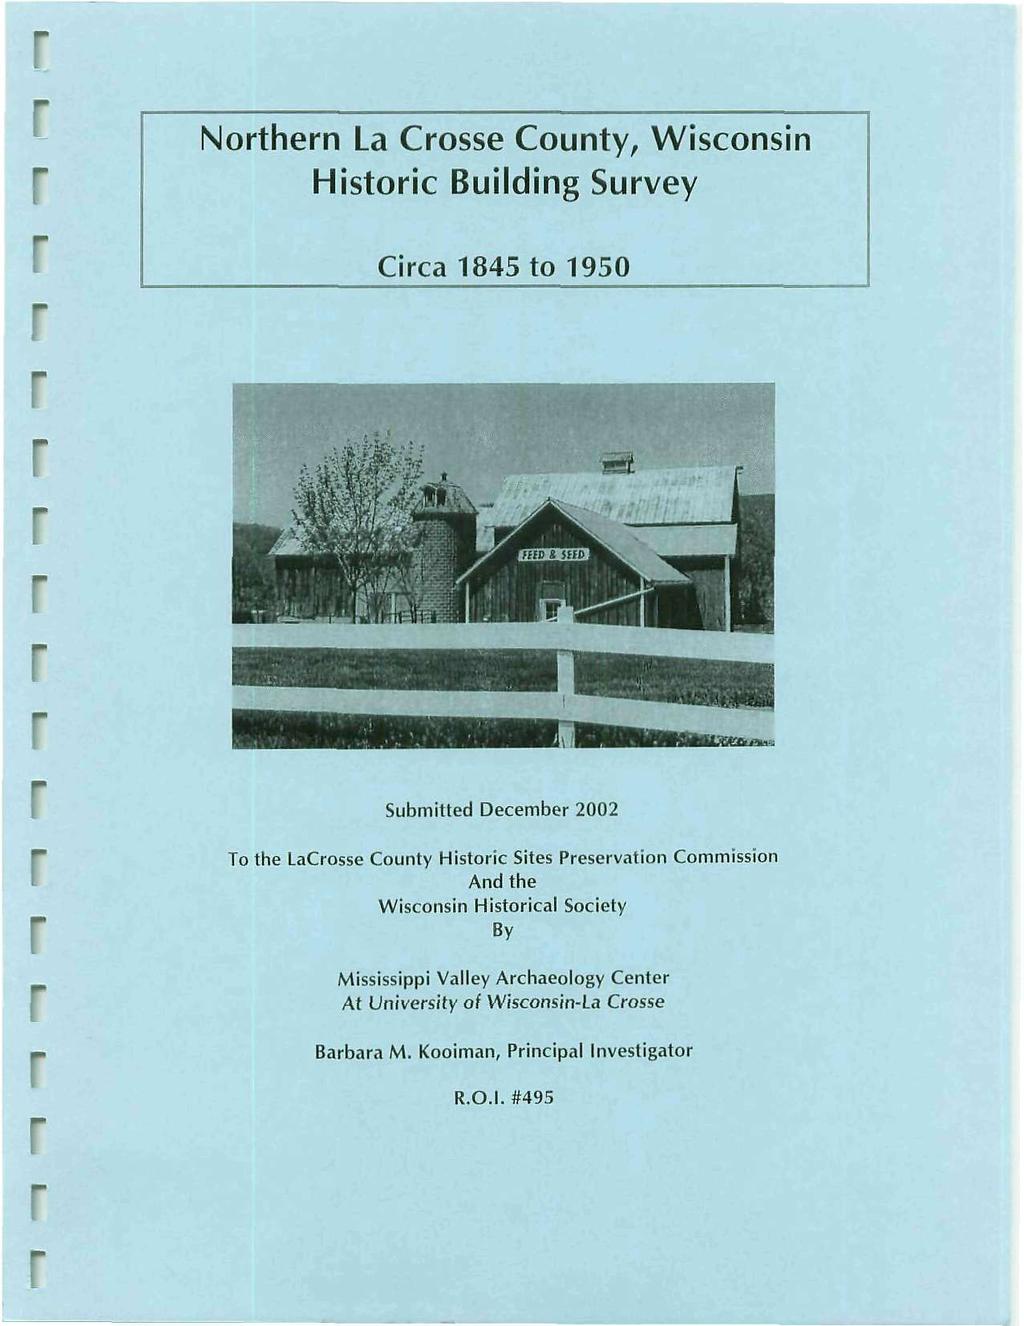 Nothen La Cosse County, Wisconsin Histoic Building Suvey Cica 845 to 950 Submitted Decembe 2002 To the LaCosse County Histoic Sites Pesevation Commission